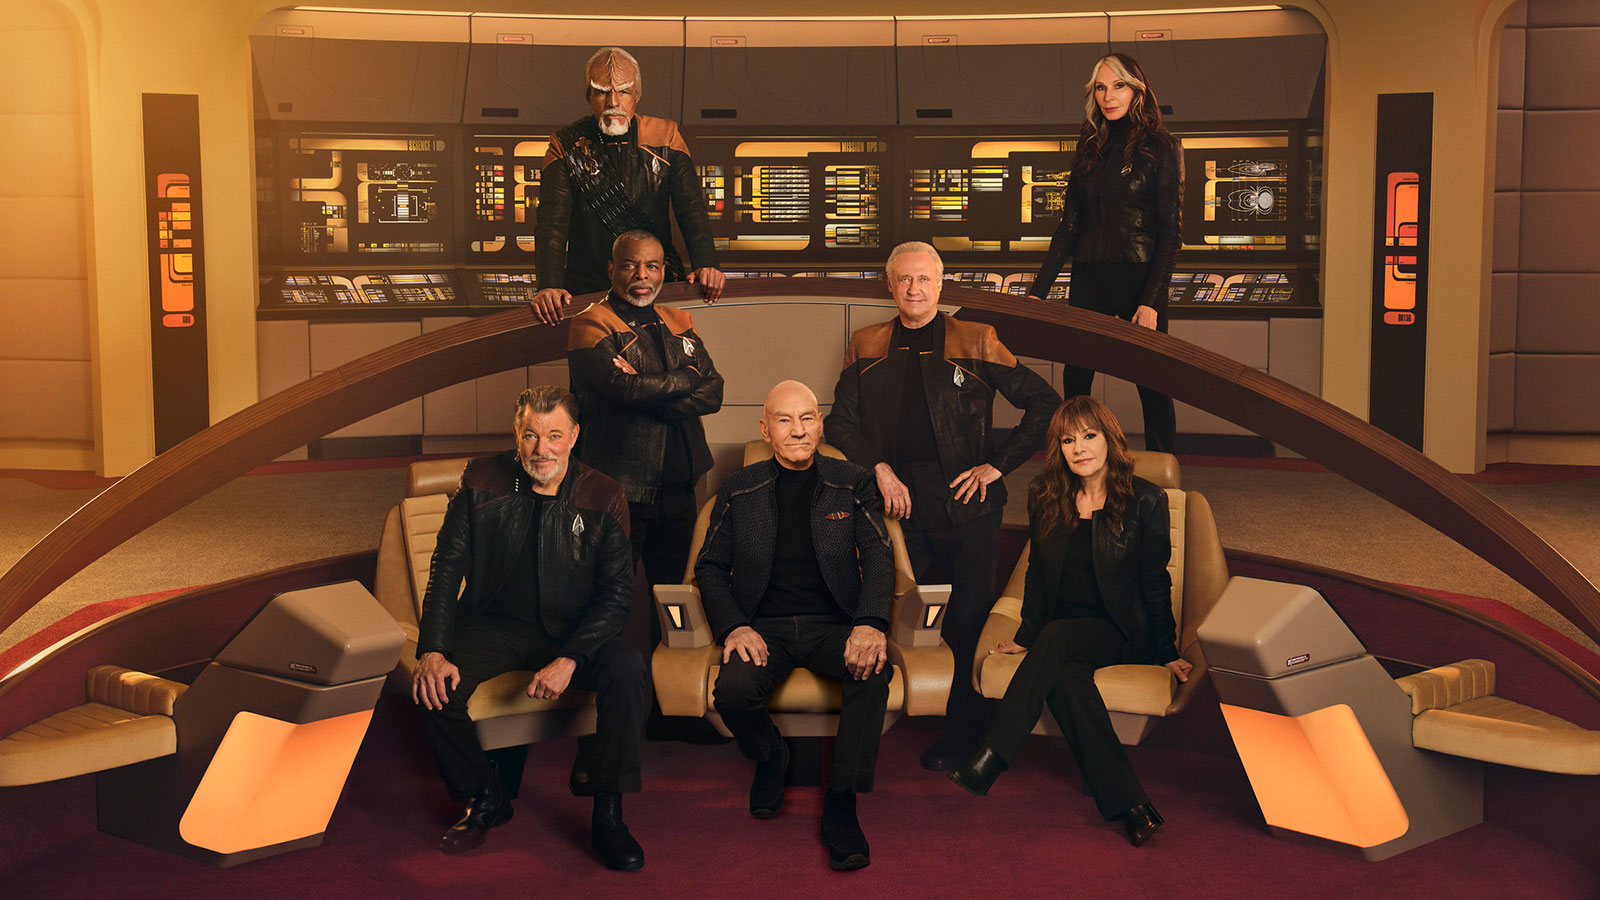 The Next The Next Generation cast is back on the bridge of the Enterprise-D in new Star Trek: Picard photo gallery cast reunites on the bridge of the Enterprise-D in new Star Trek: Picard photo gallery